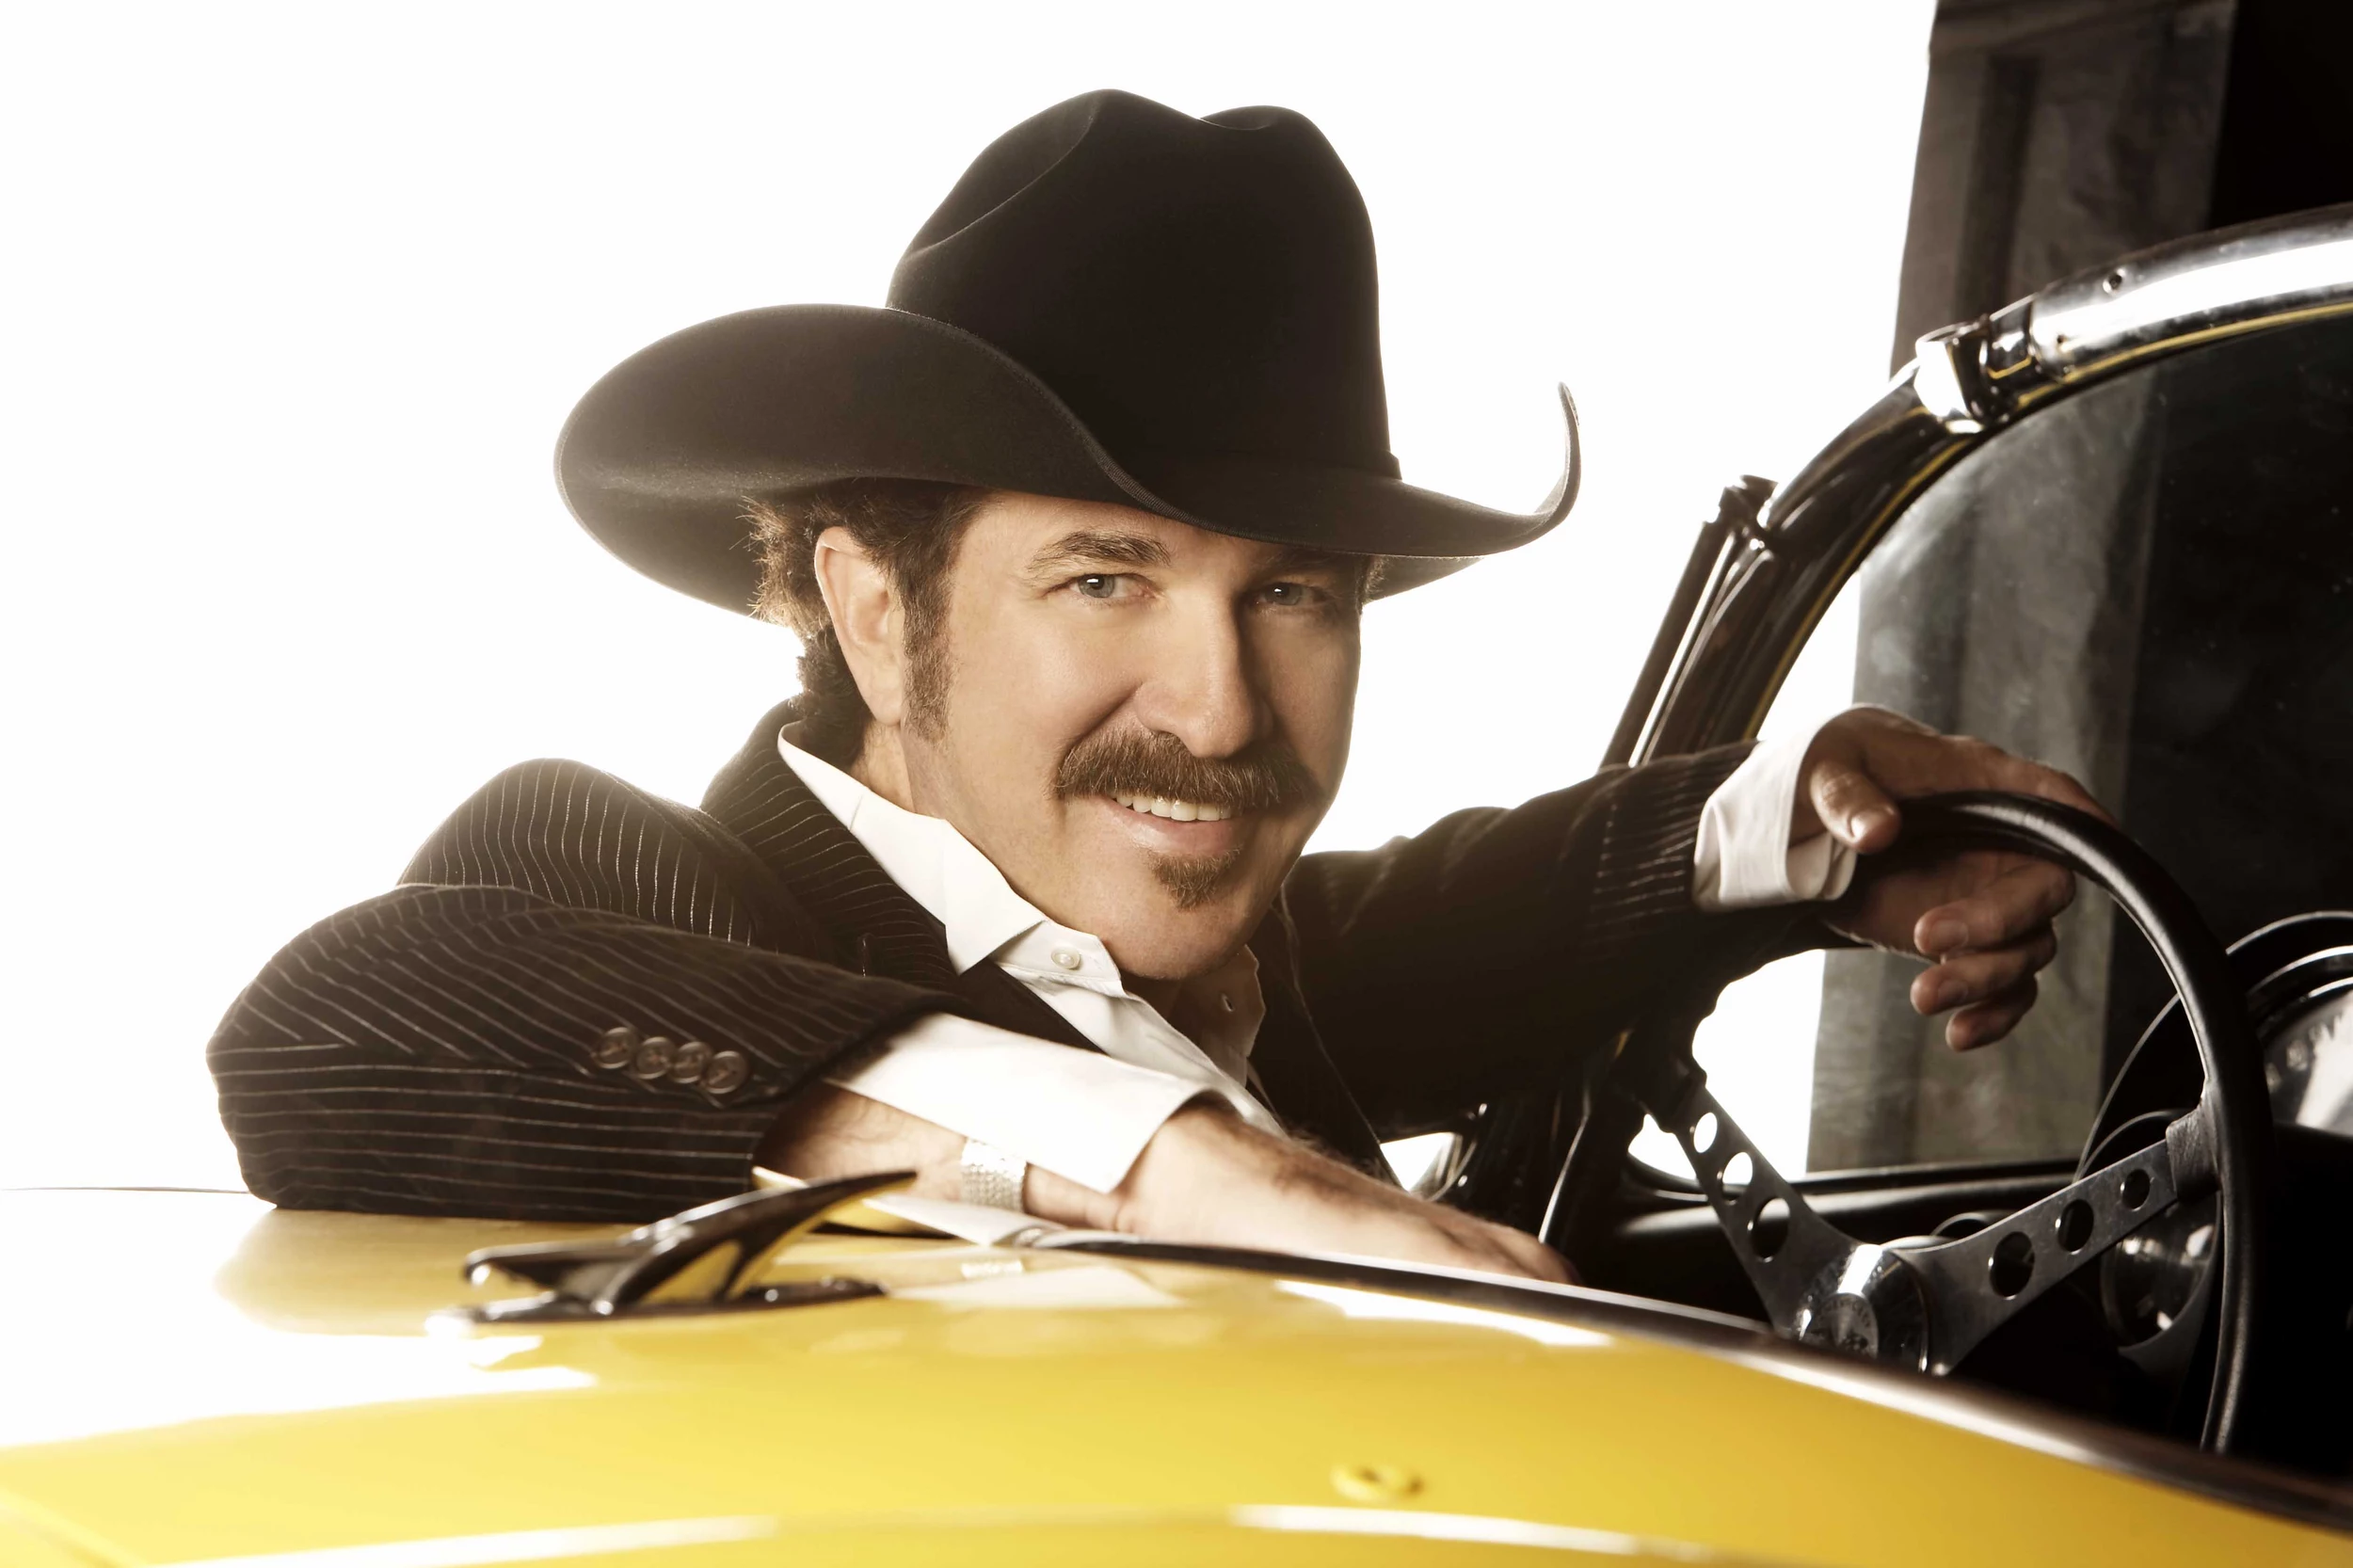 american country countdown with kix brooks